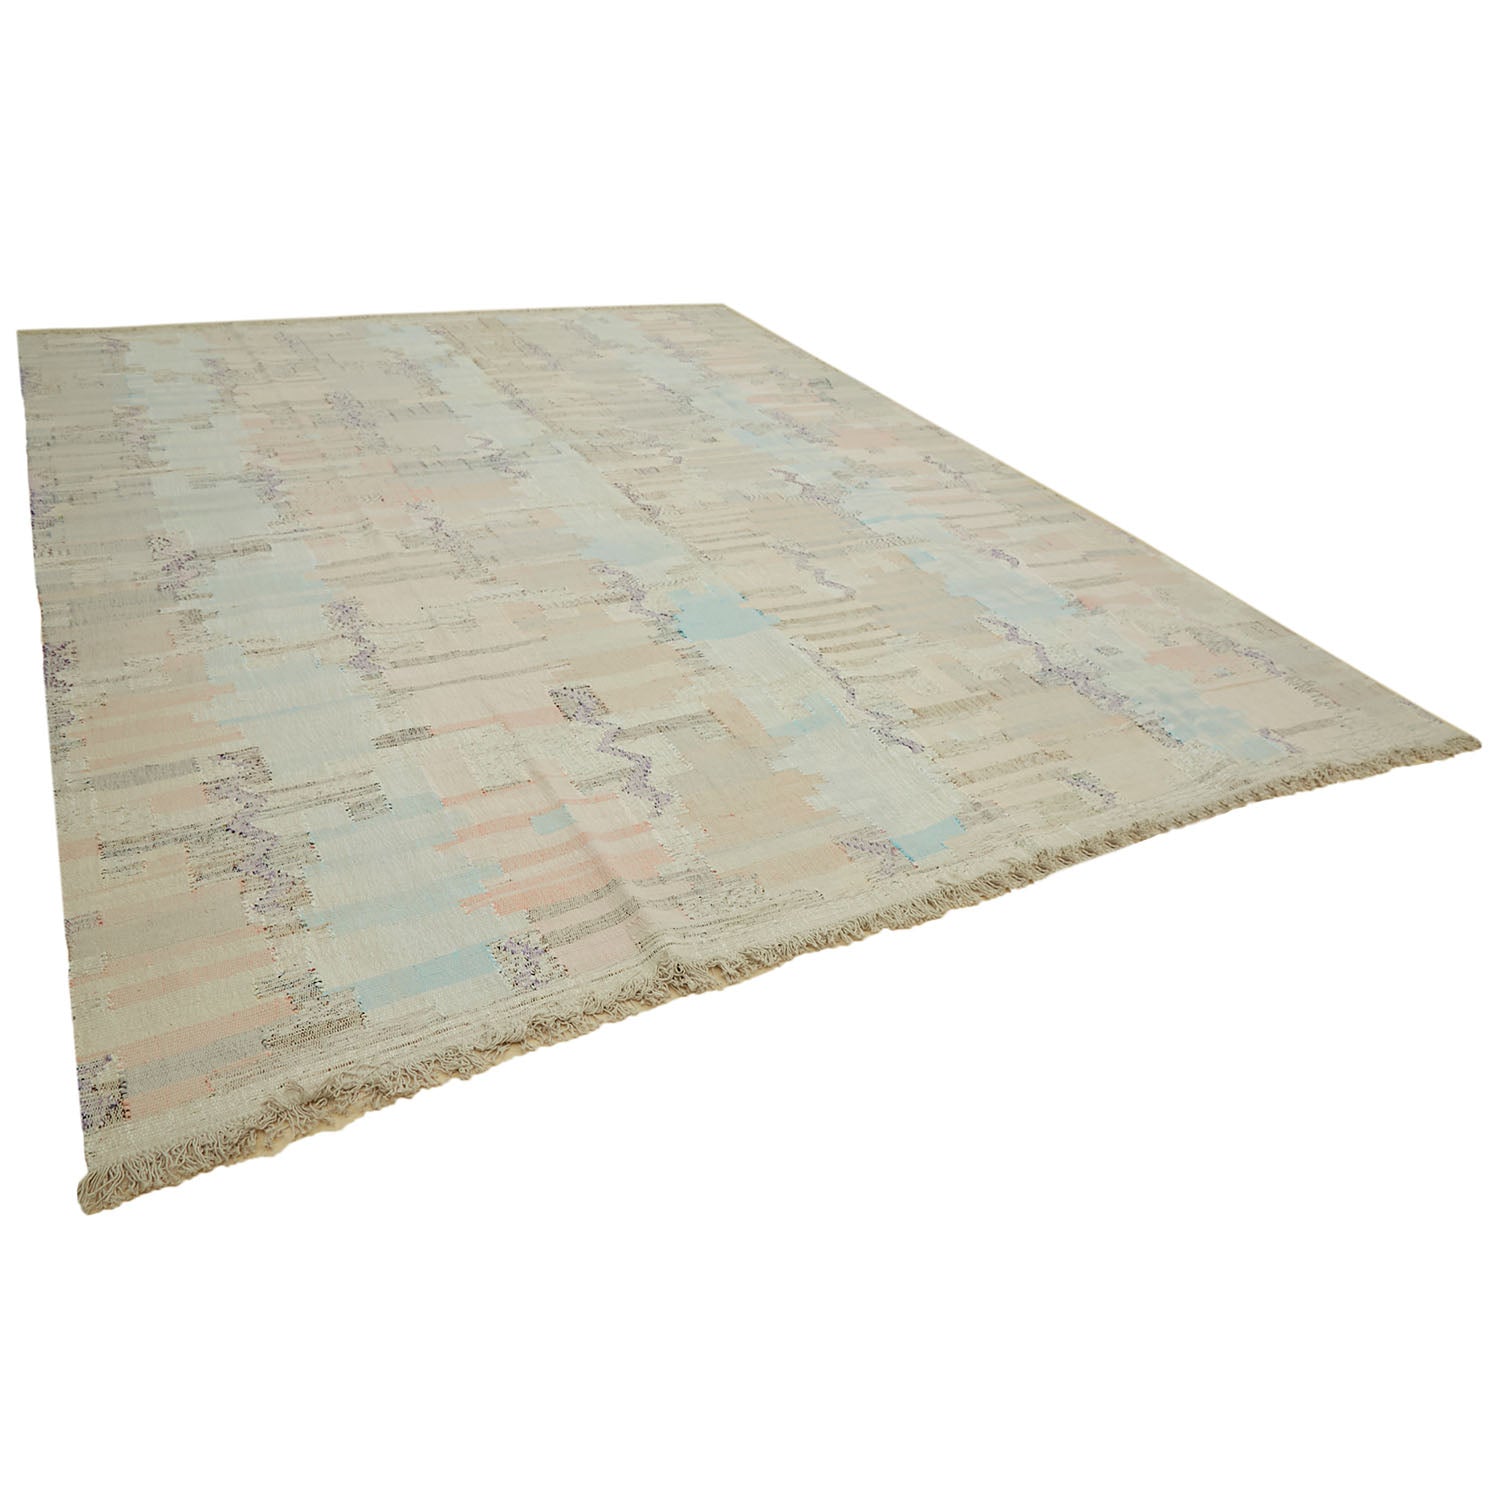 Modern distressed area rug with pastel colors and geometric motif.